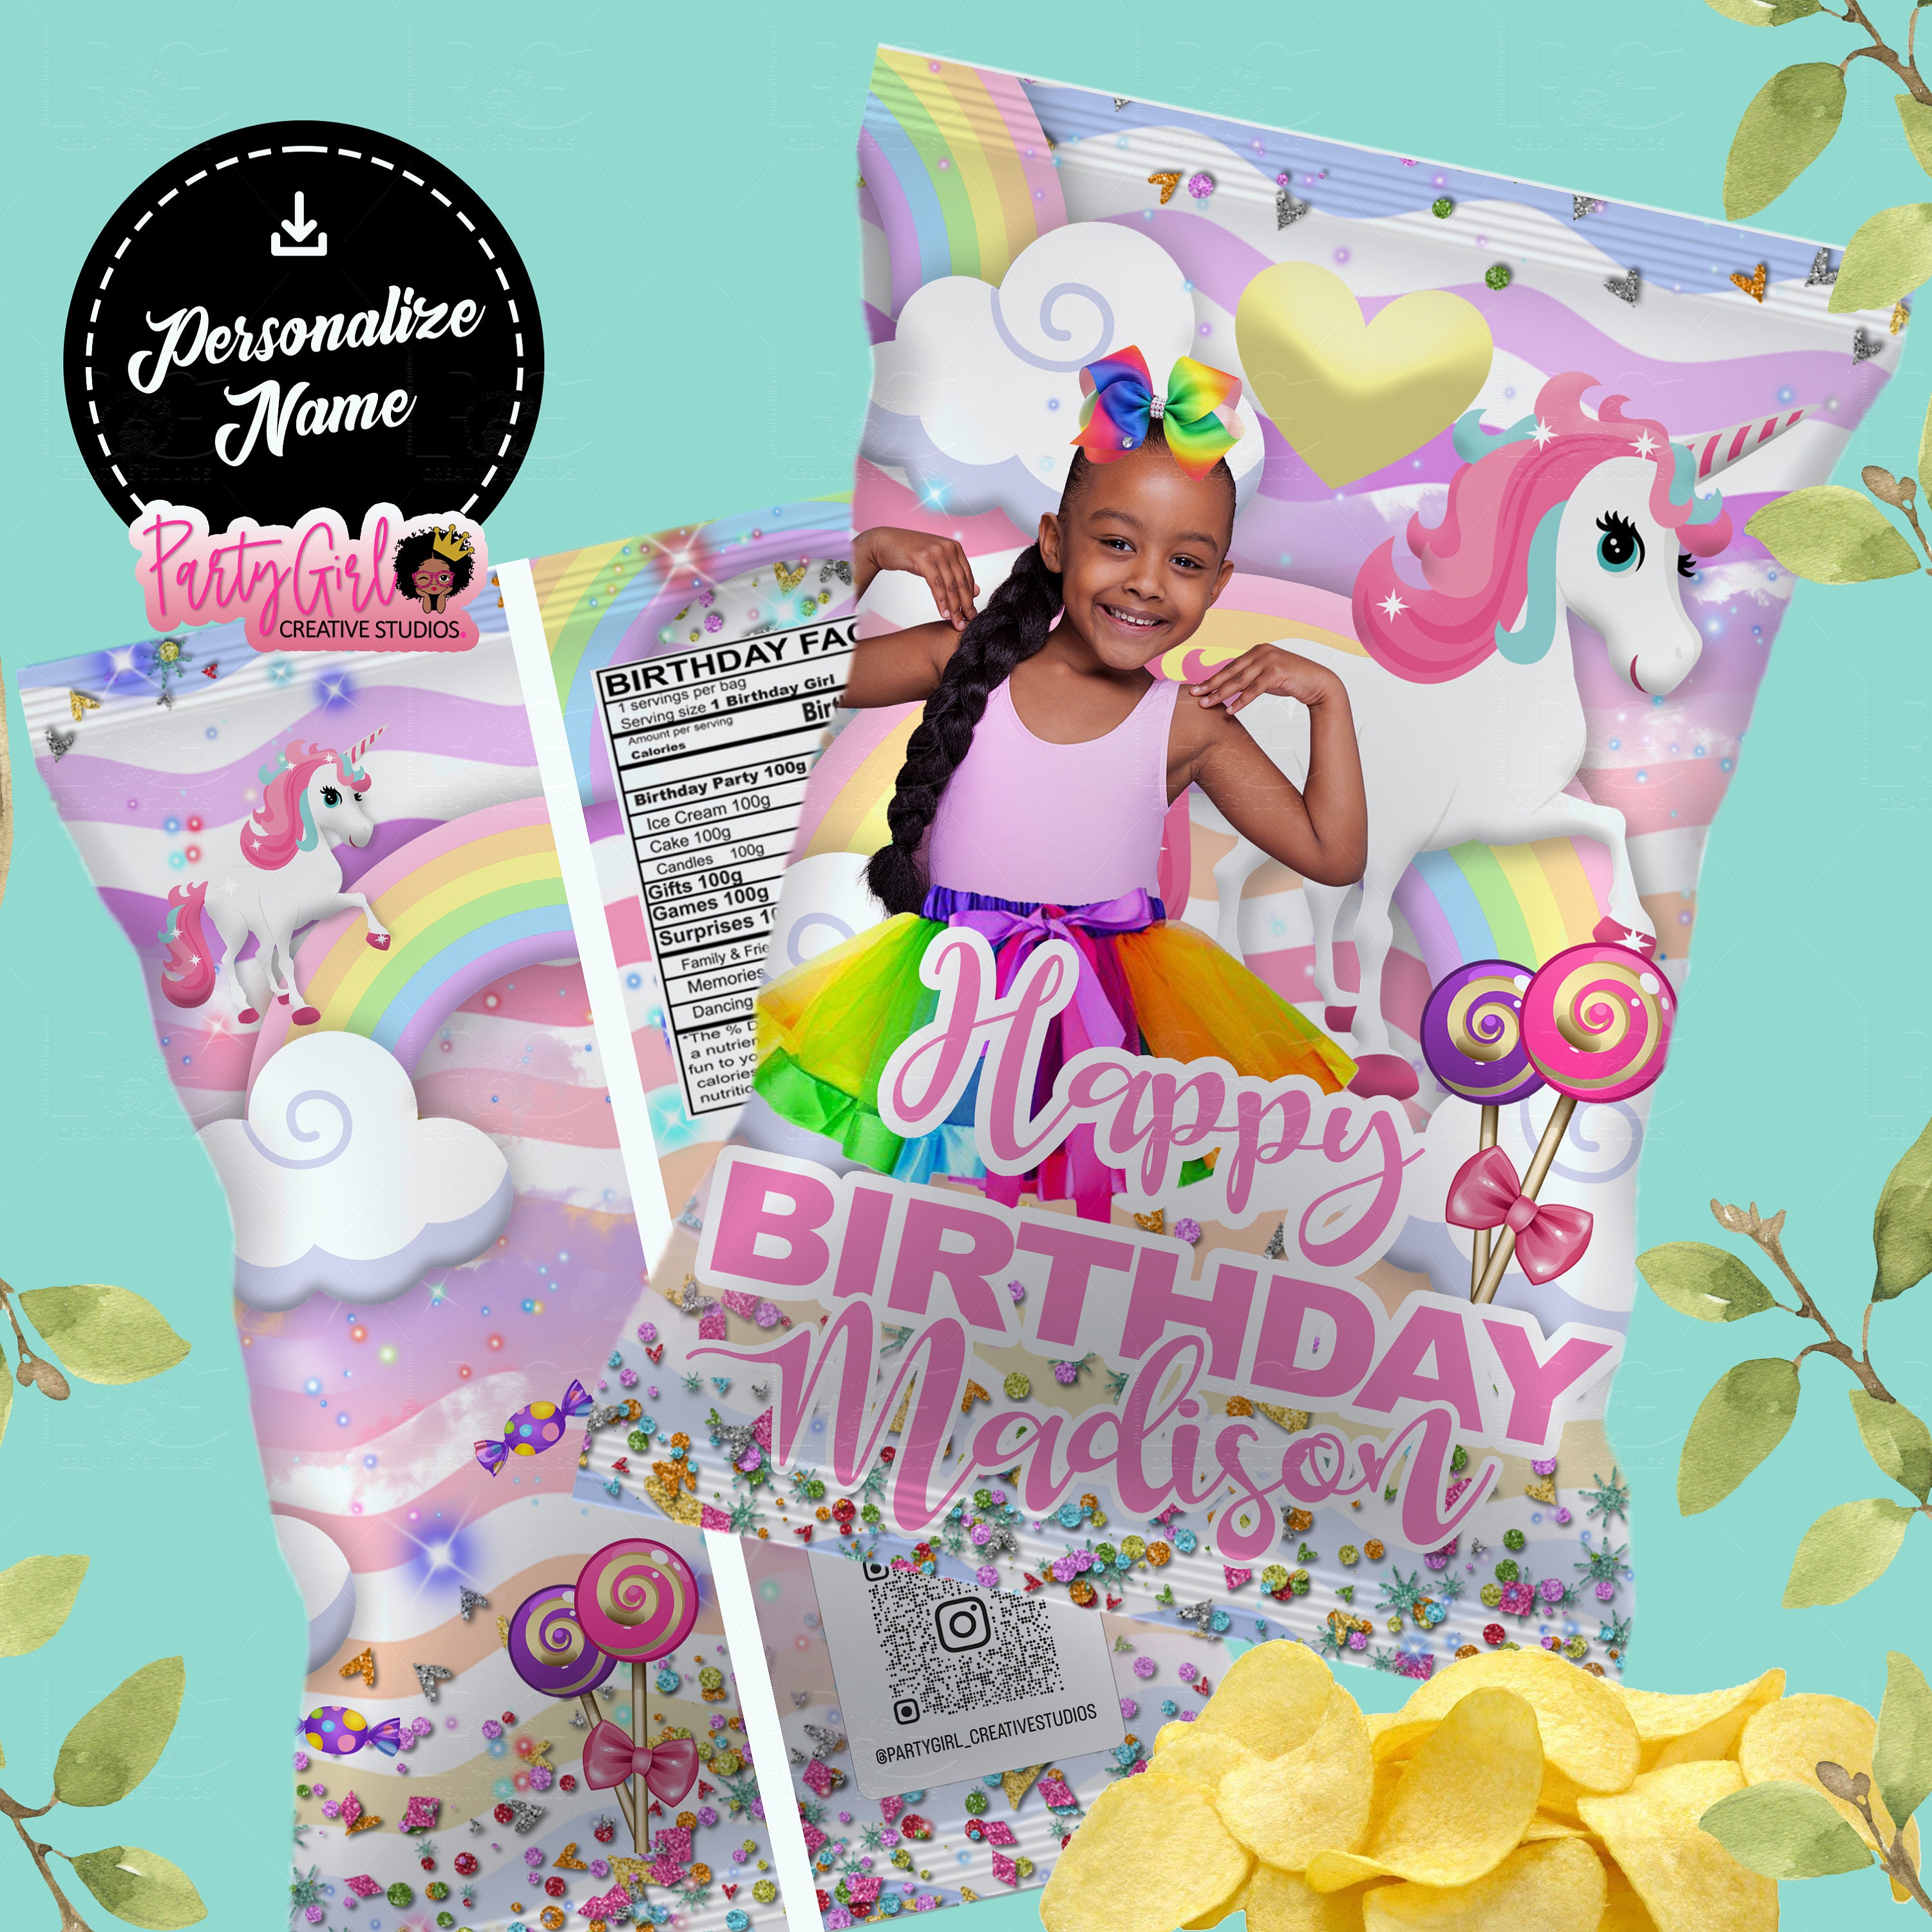  10 UNICORN PARTY FAVORS, DIY, Girls birthday party, to paint.  2,3,4,5,6,7,8,9 years old girls. Creative. Class, school.(10 bags 1 in each  bag.) : Handmade Products